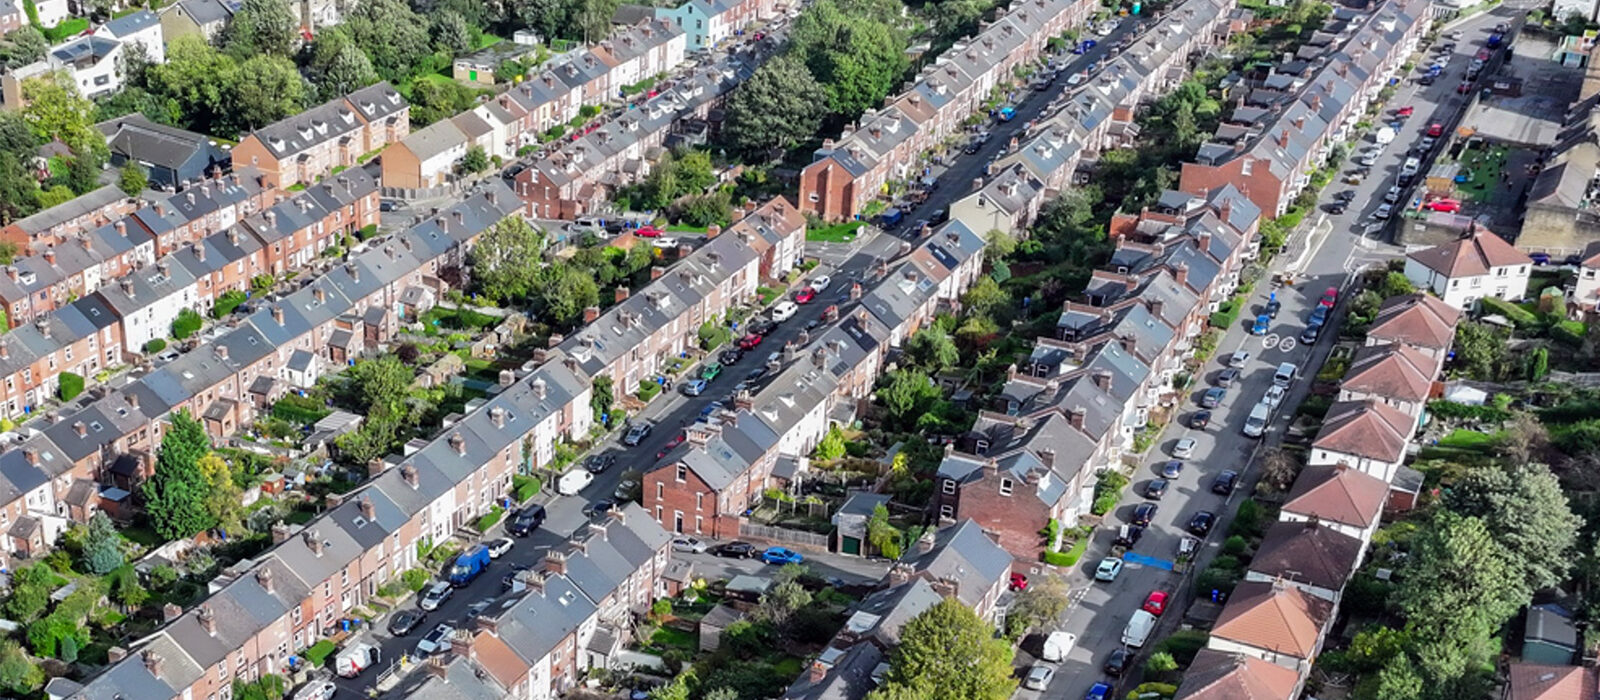 Aerial view of densly populated area with abundant street trees